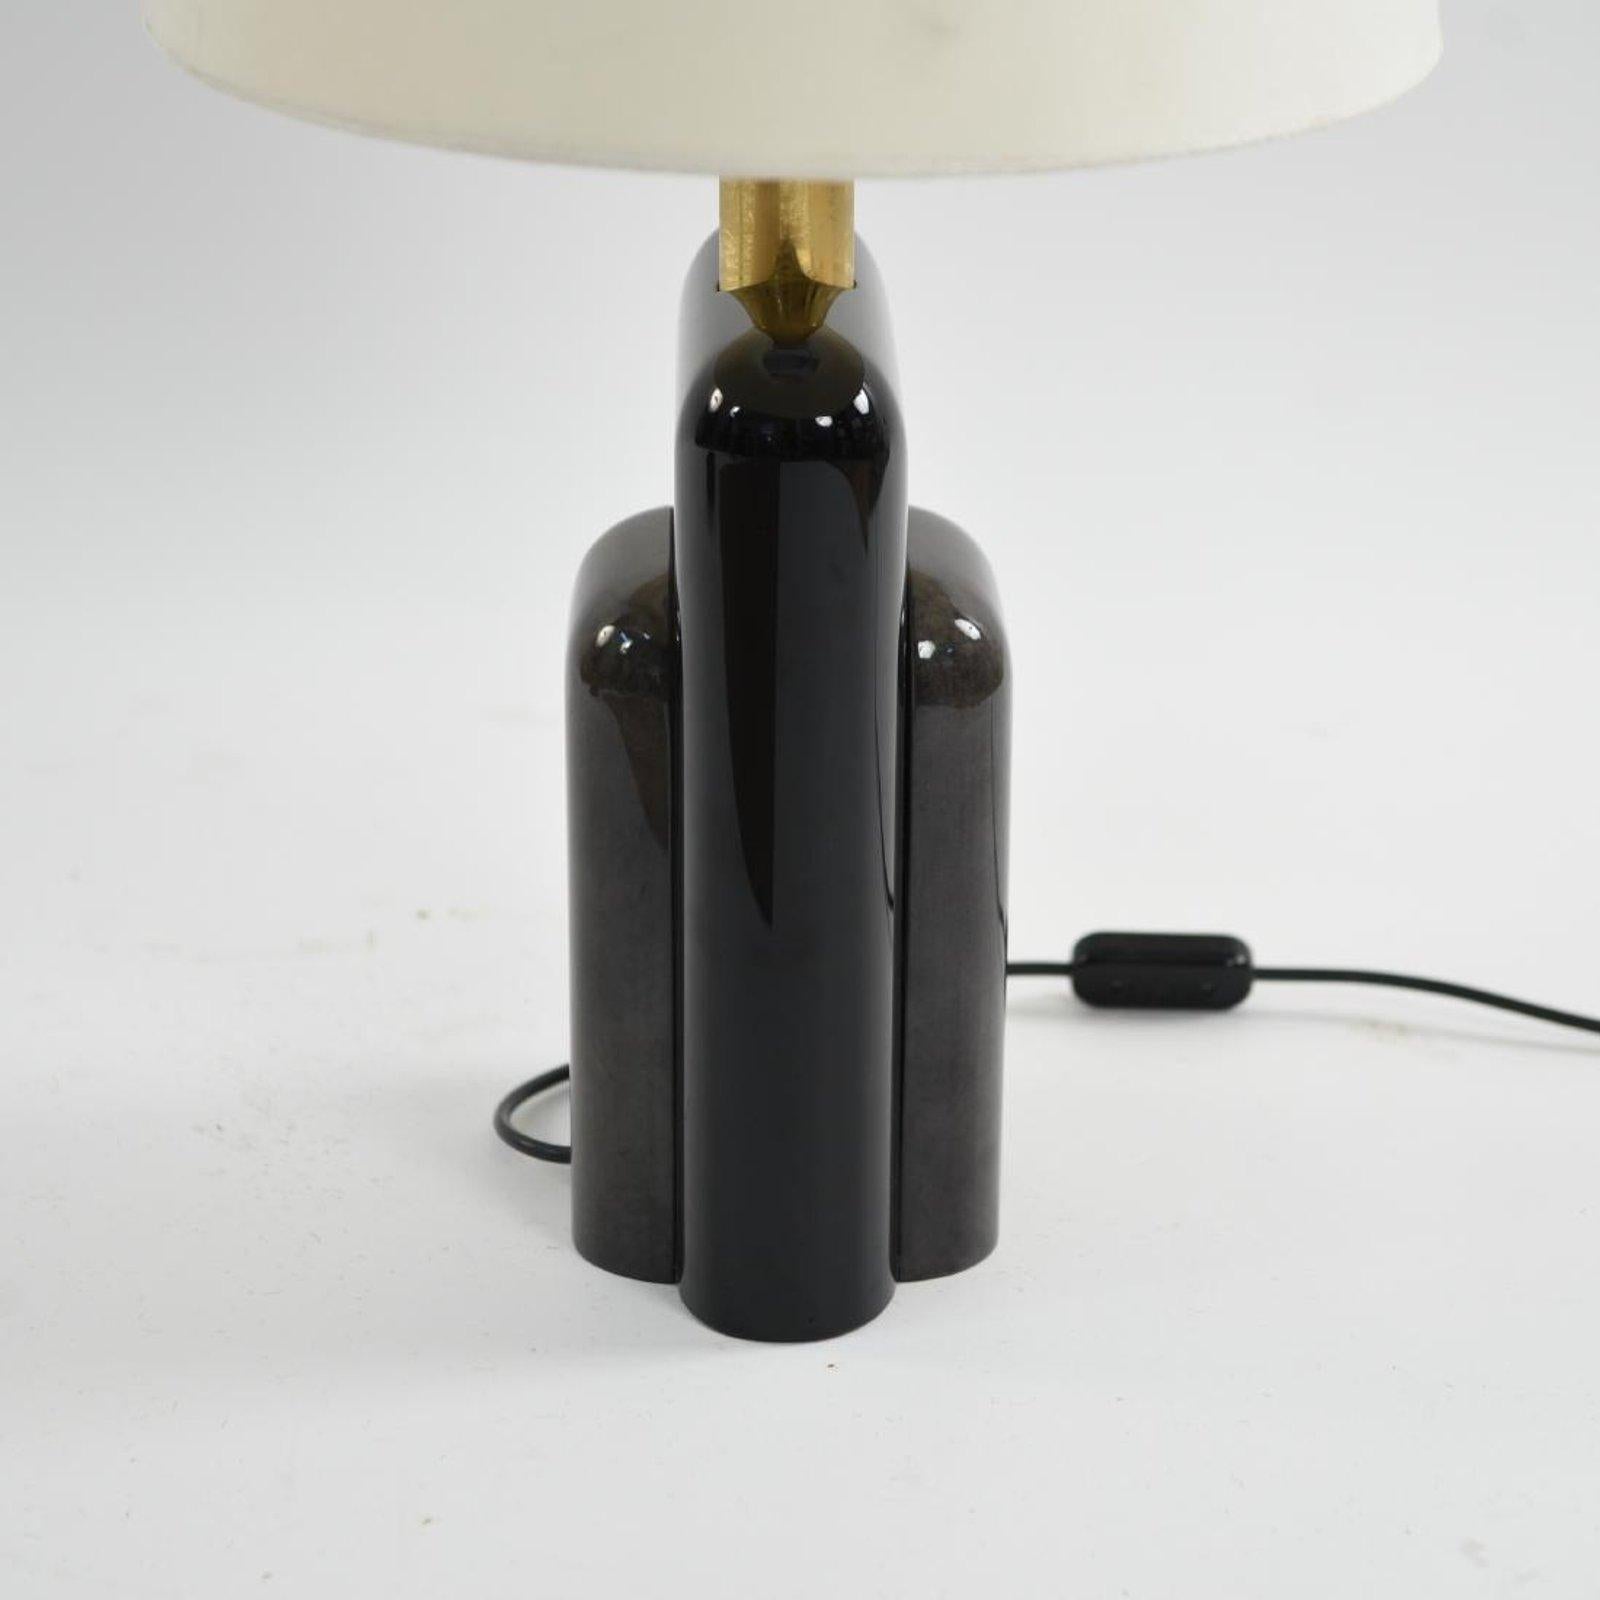 Goatskin and lacquer streamlined moderne lamp. Made in Italy. Measures: 18